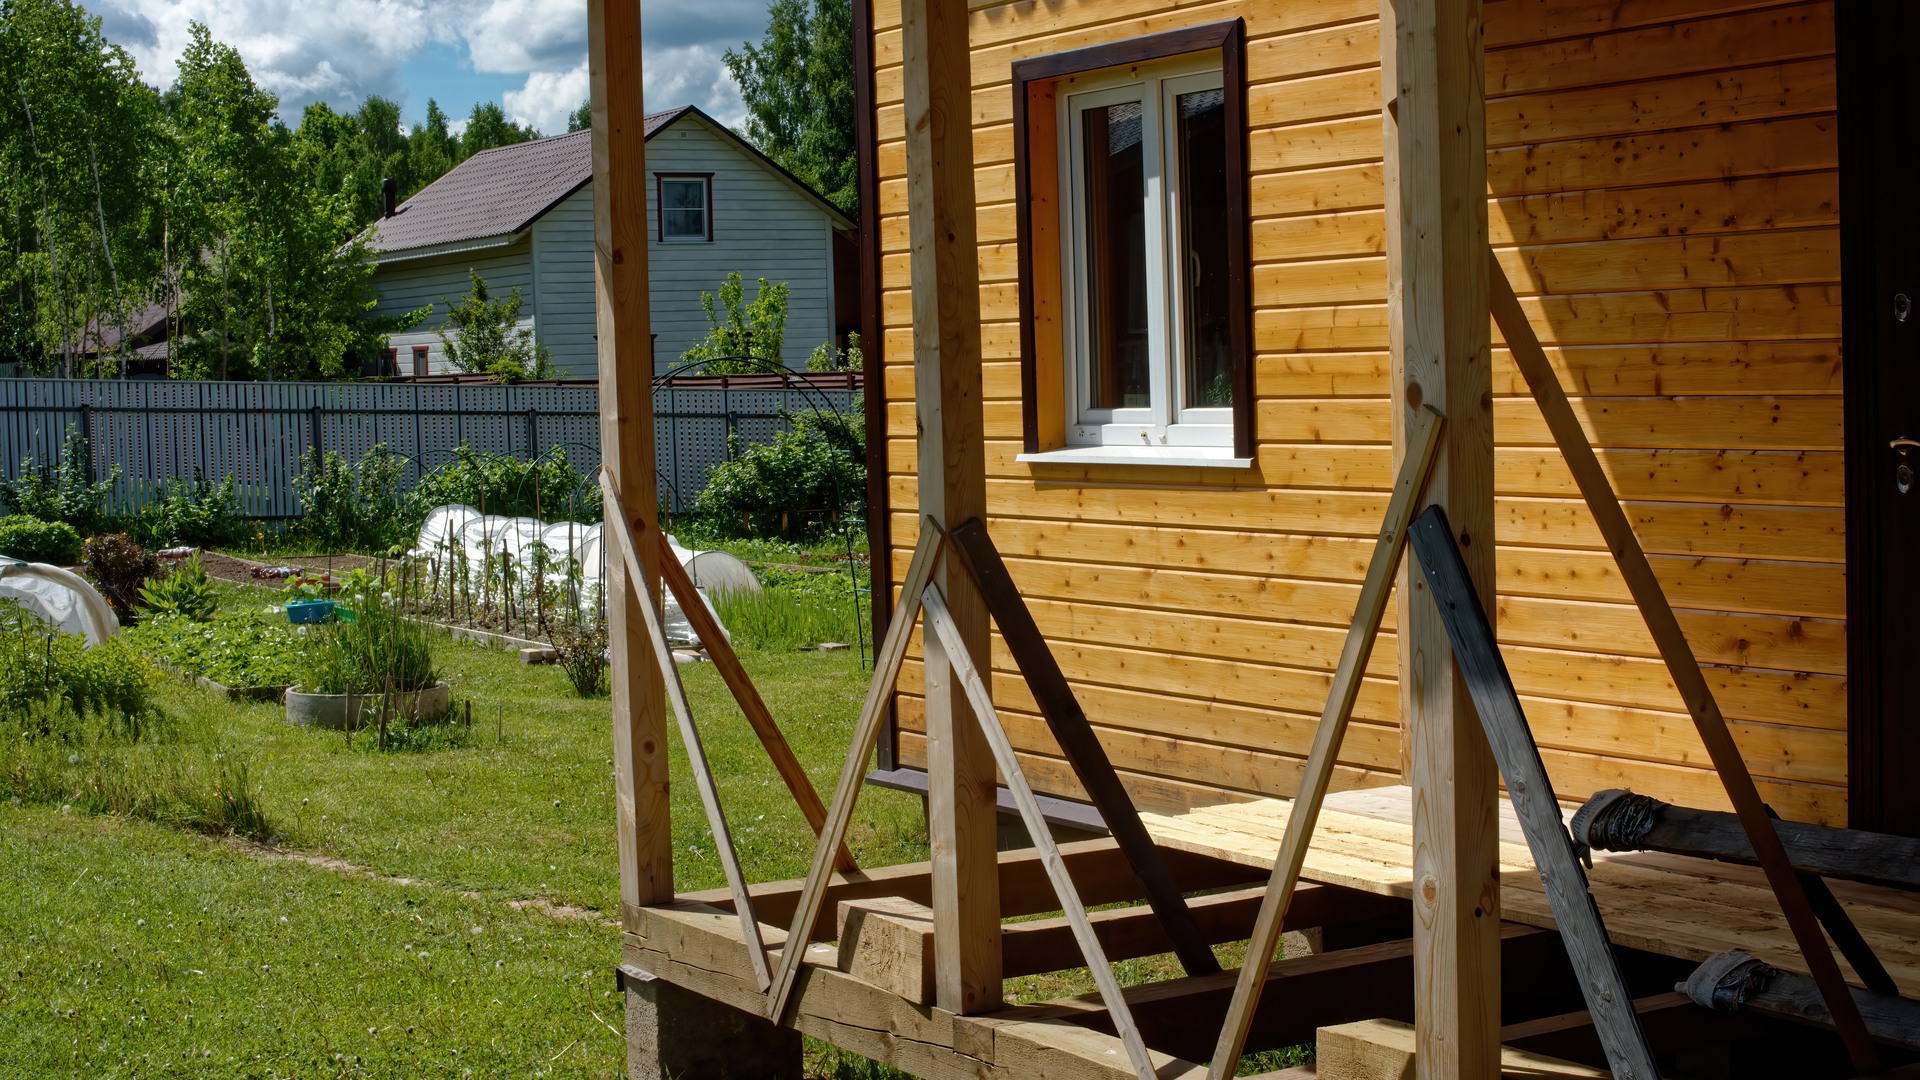 construction of wooden extensions of a rural house, russia